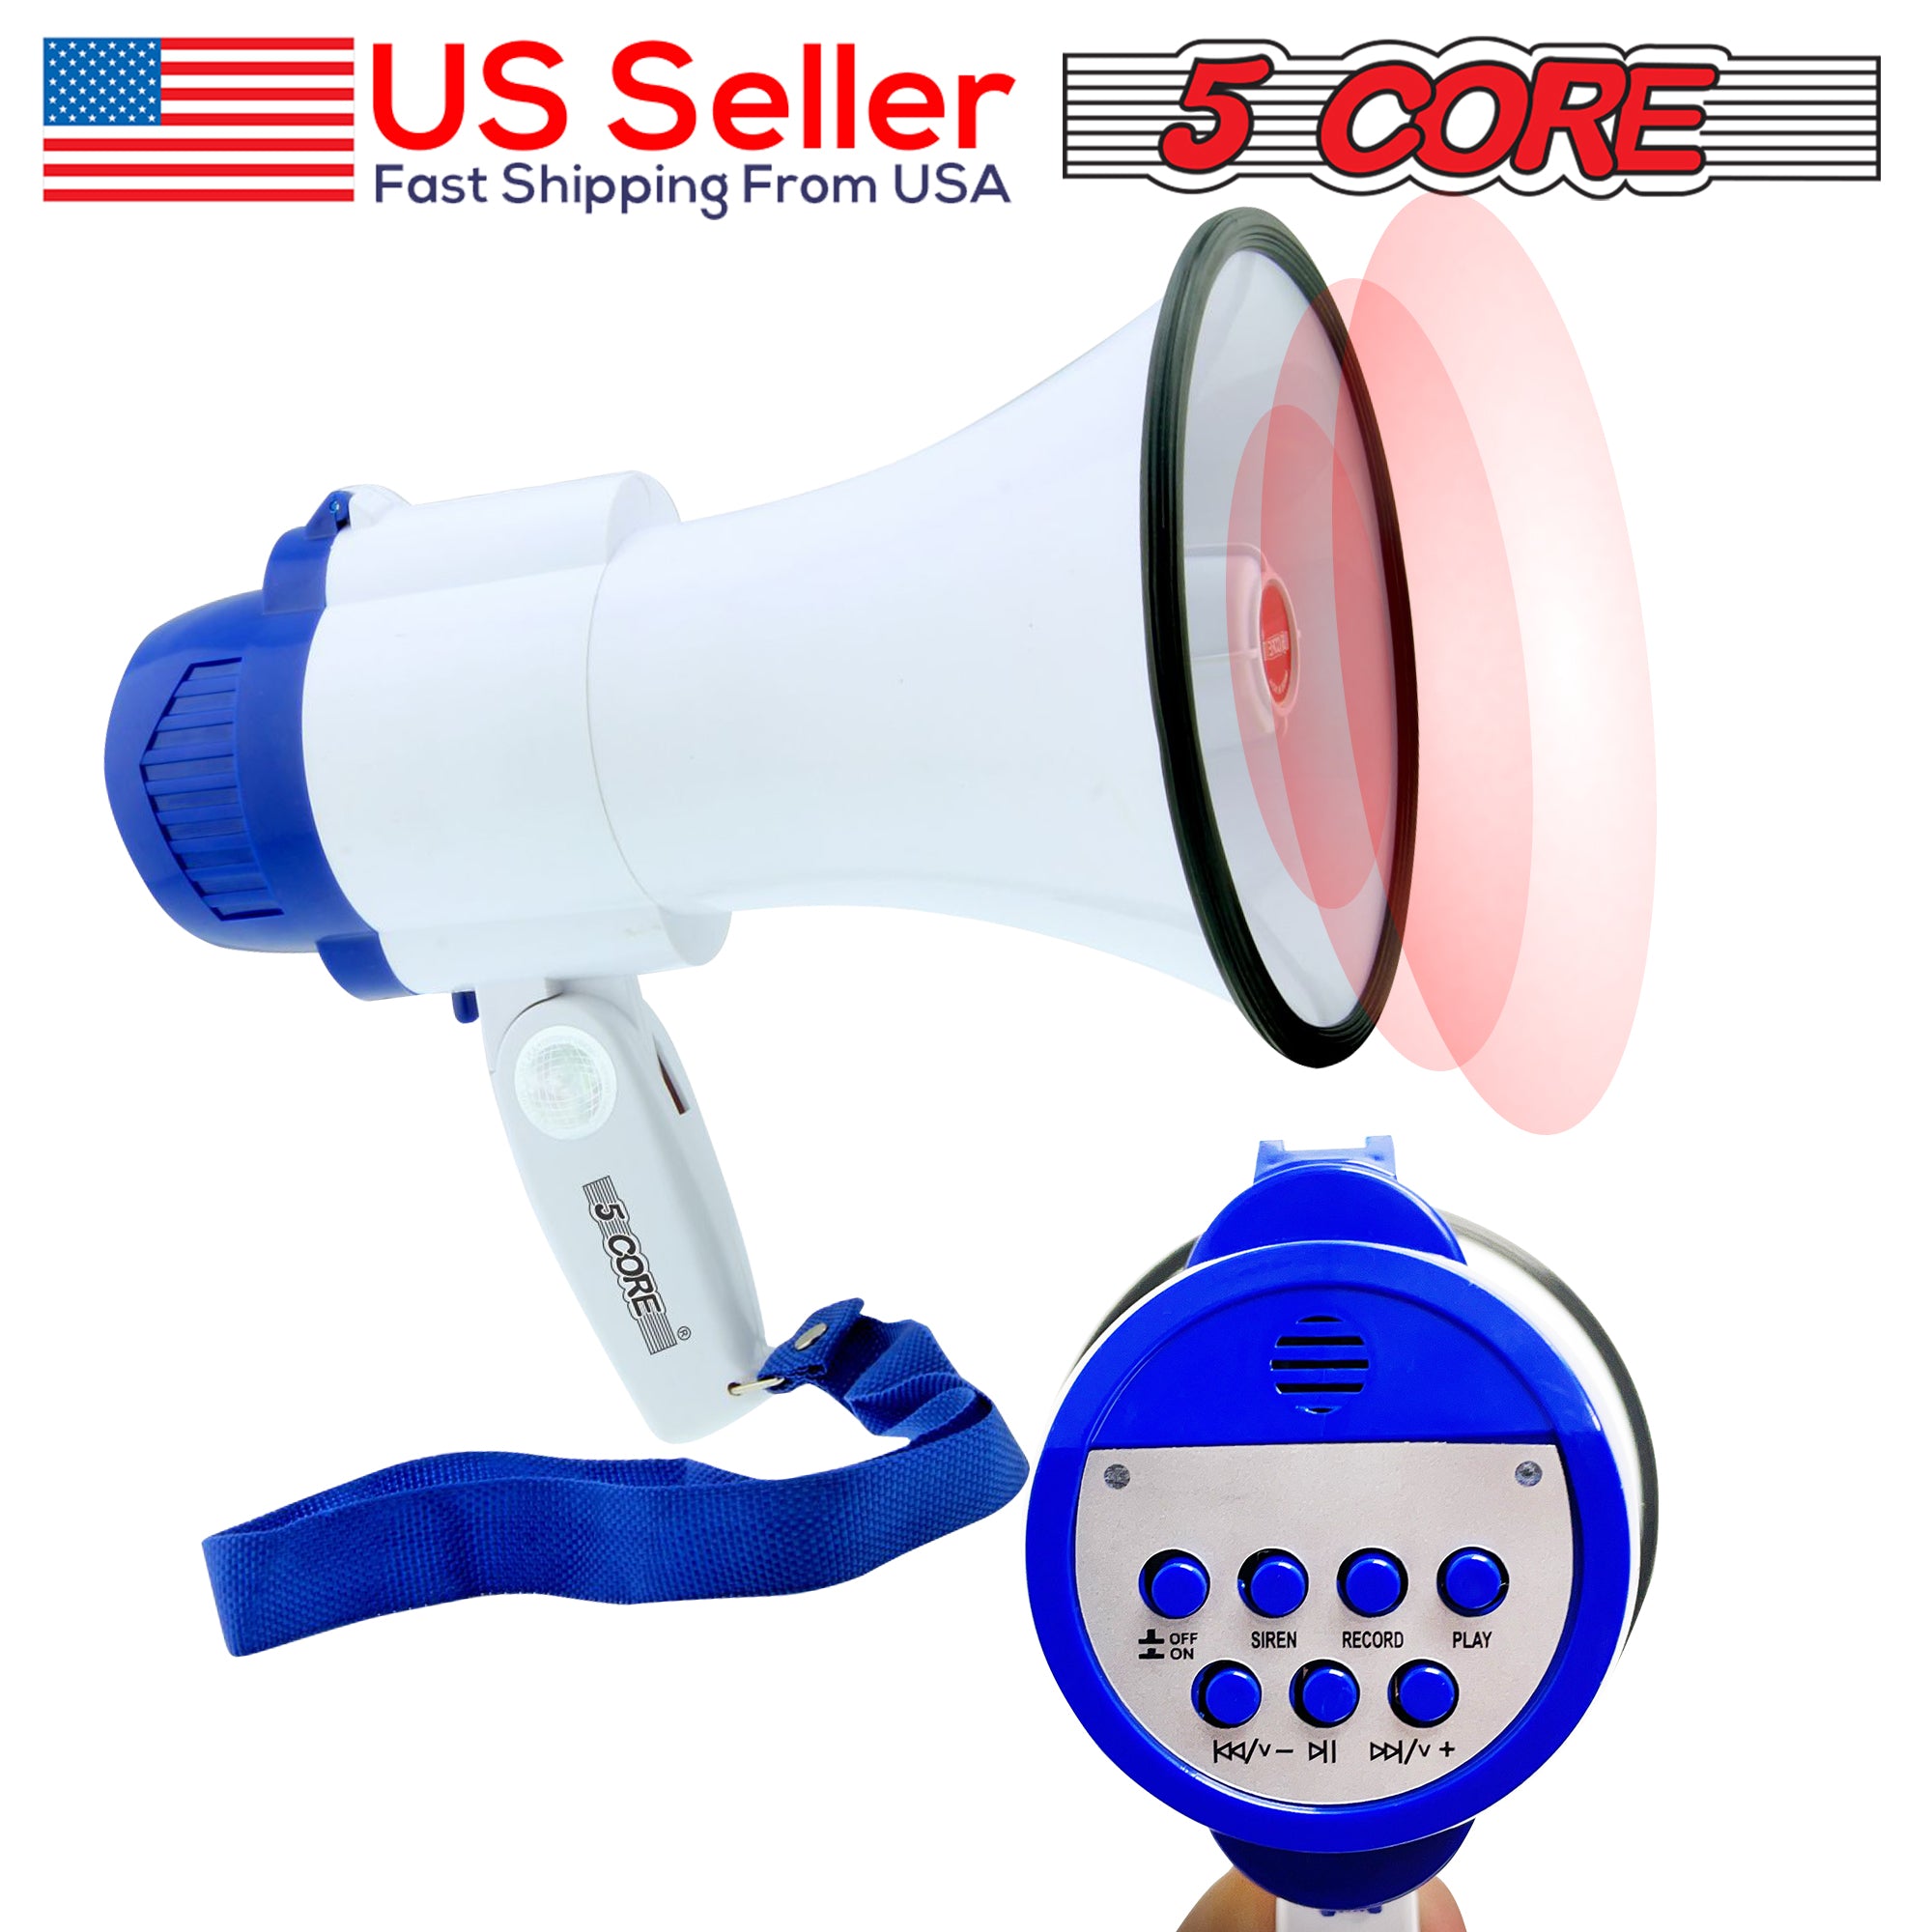 5 Core Megaphone Bull Horn 30W Loud Speaker 800 Yards Range Rechargeable Portable USB  Bullhorn w Recording Volume Control Siren Noise Maker for Kids and Adults for Cheerleading Football Safety Drills -8R-USB WOB